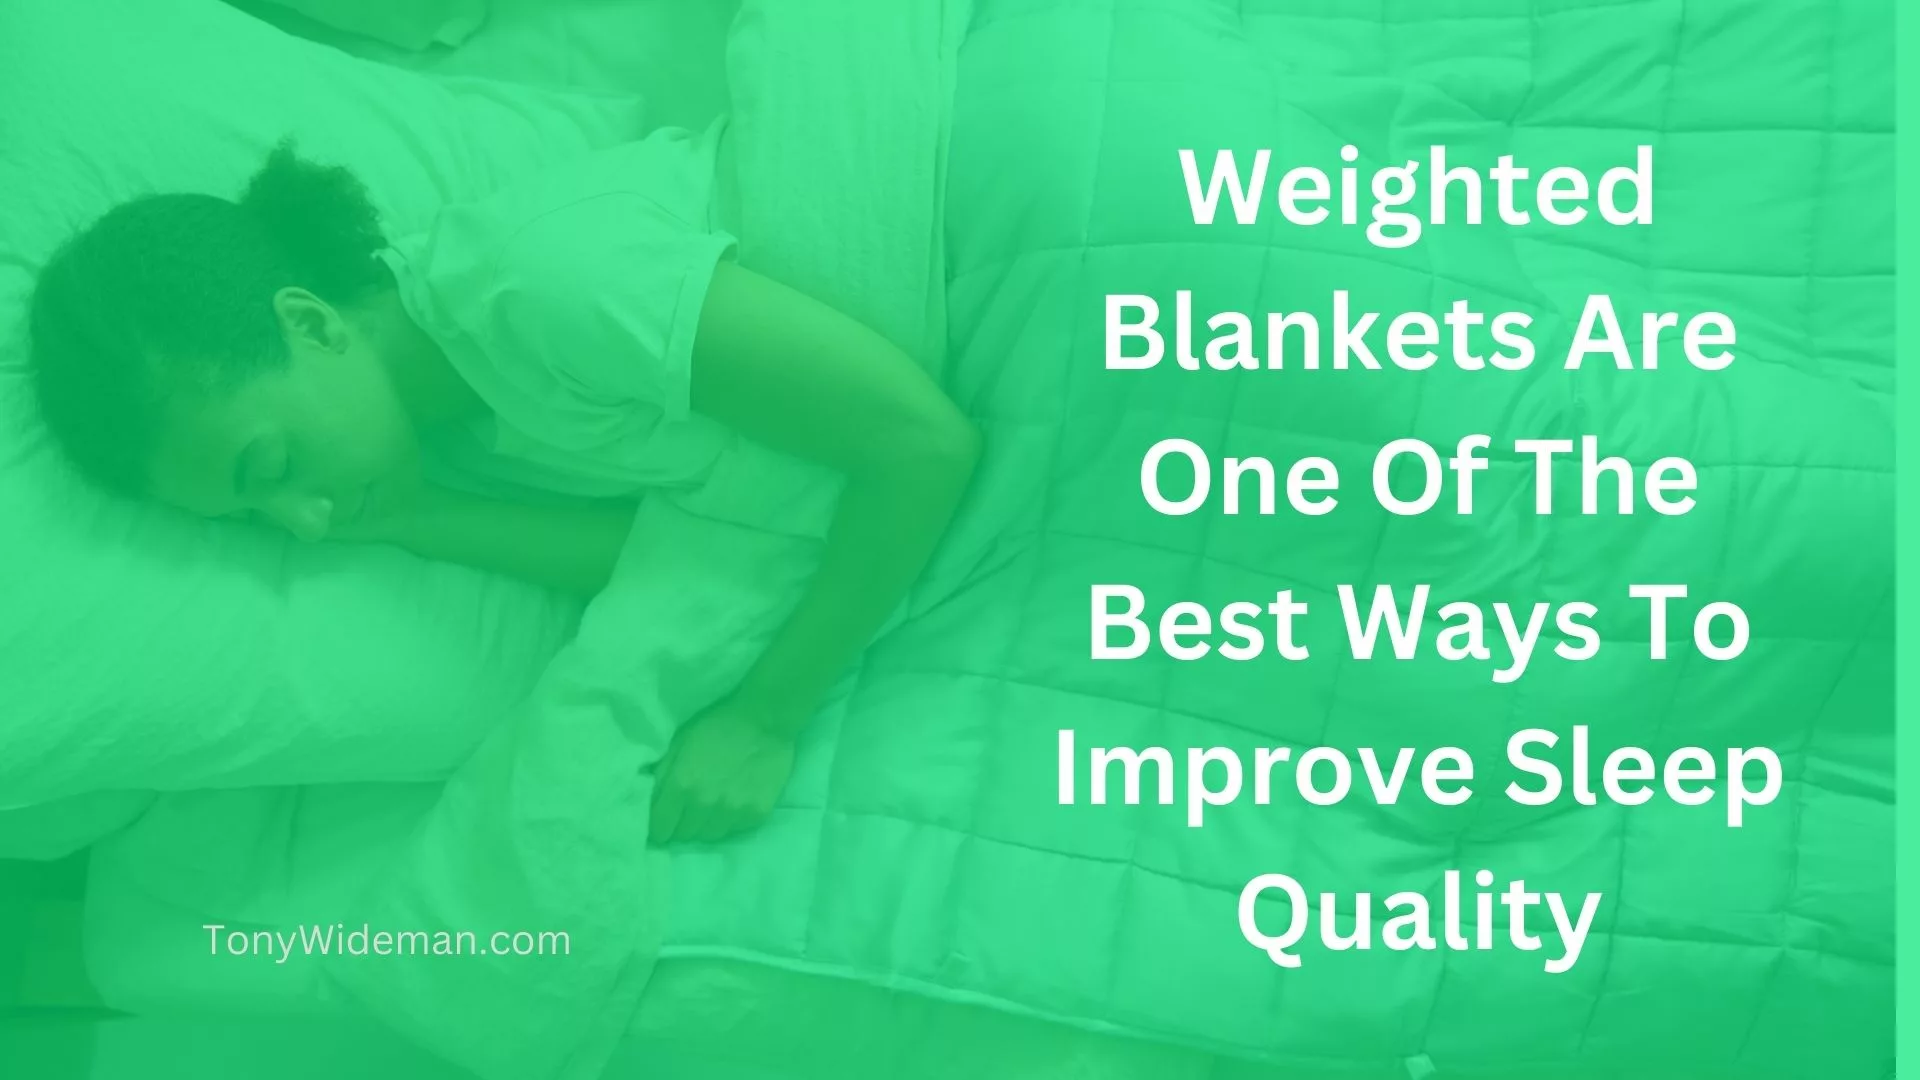 Weighted Blankets Are One Of The Best Ways To Improve Sleep Quality